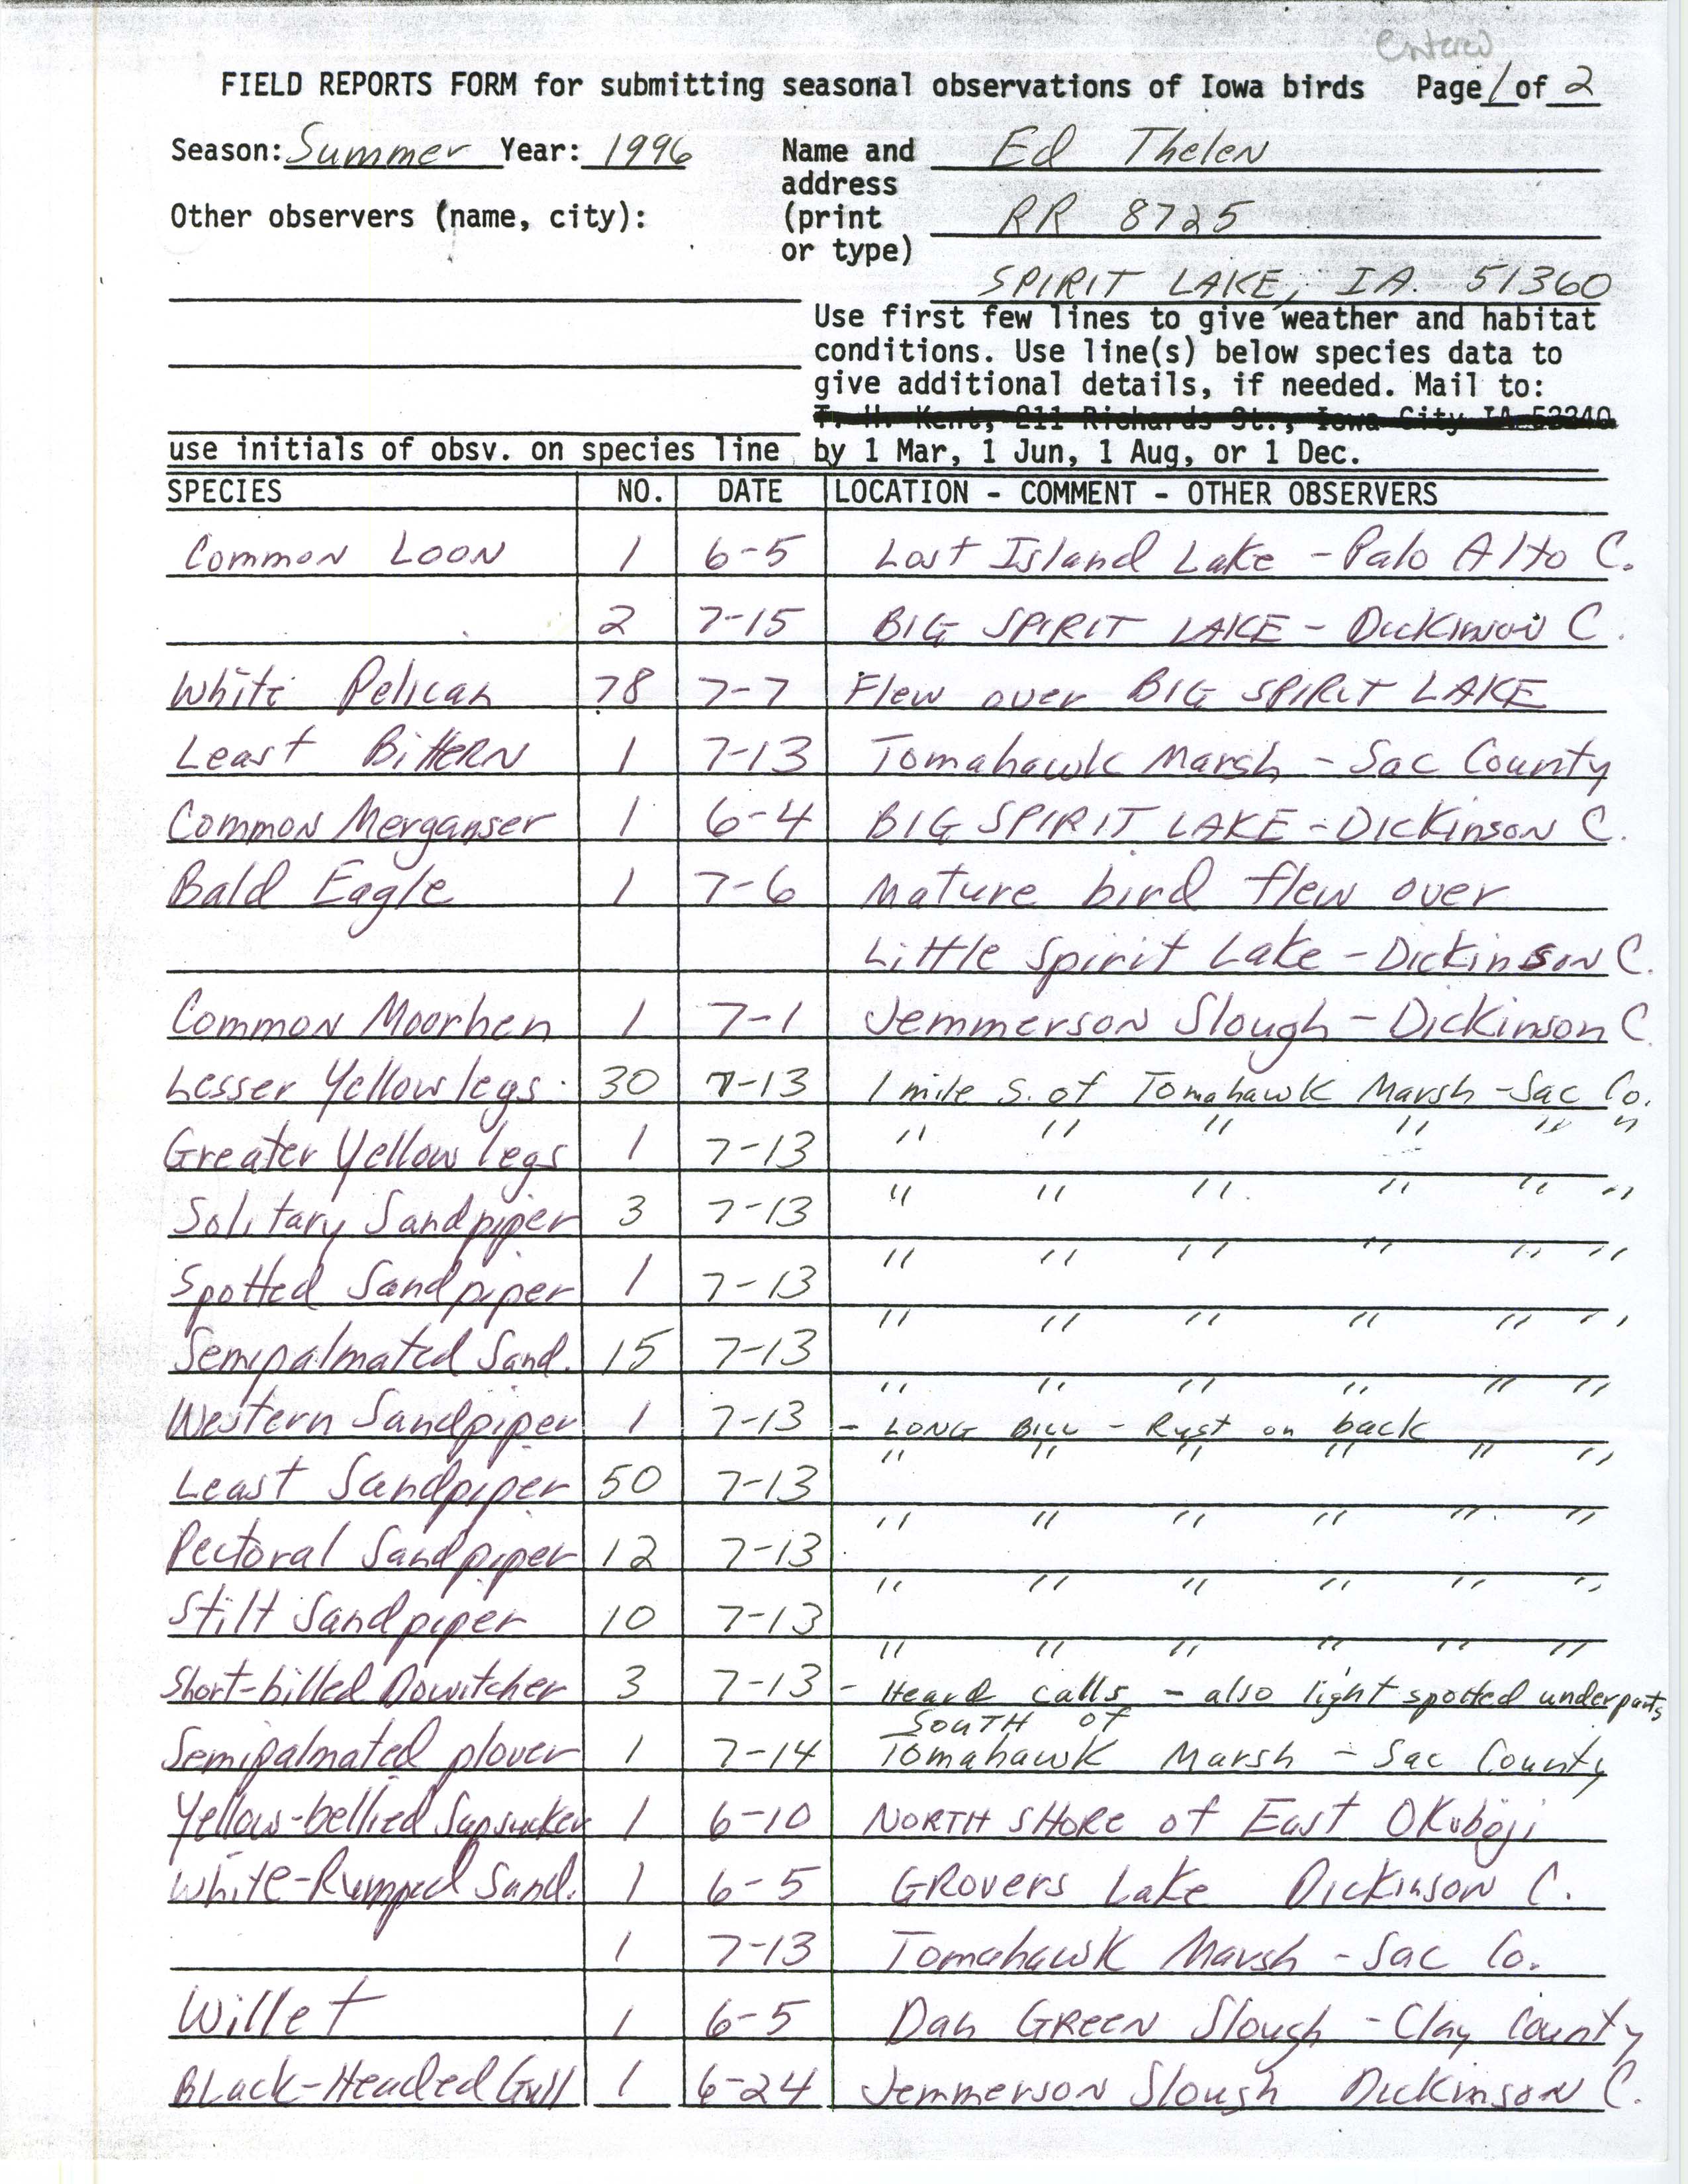 Field reports form for submitting seasonal observations of Iowa birds, Ed Thelen, summer 1996